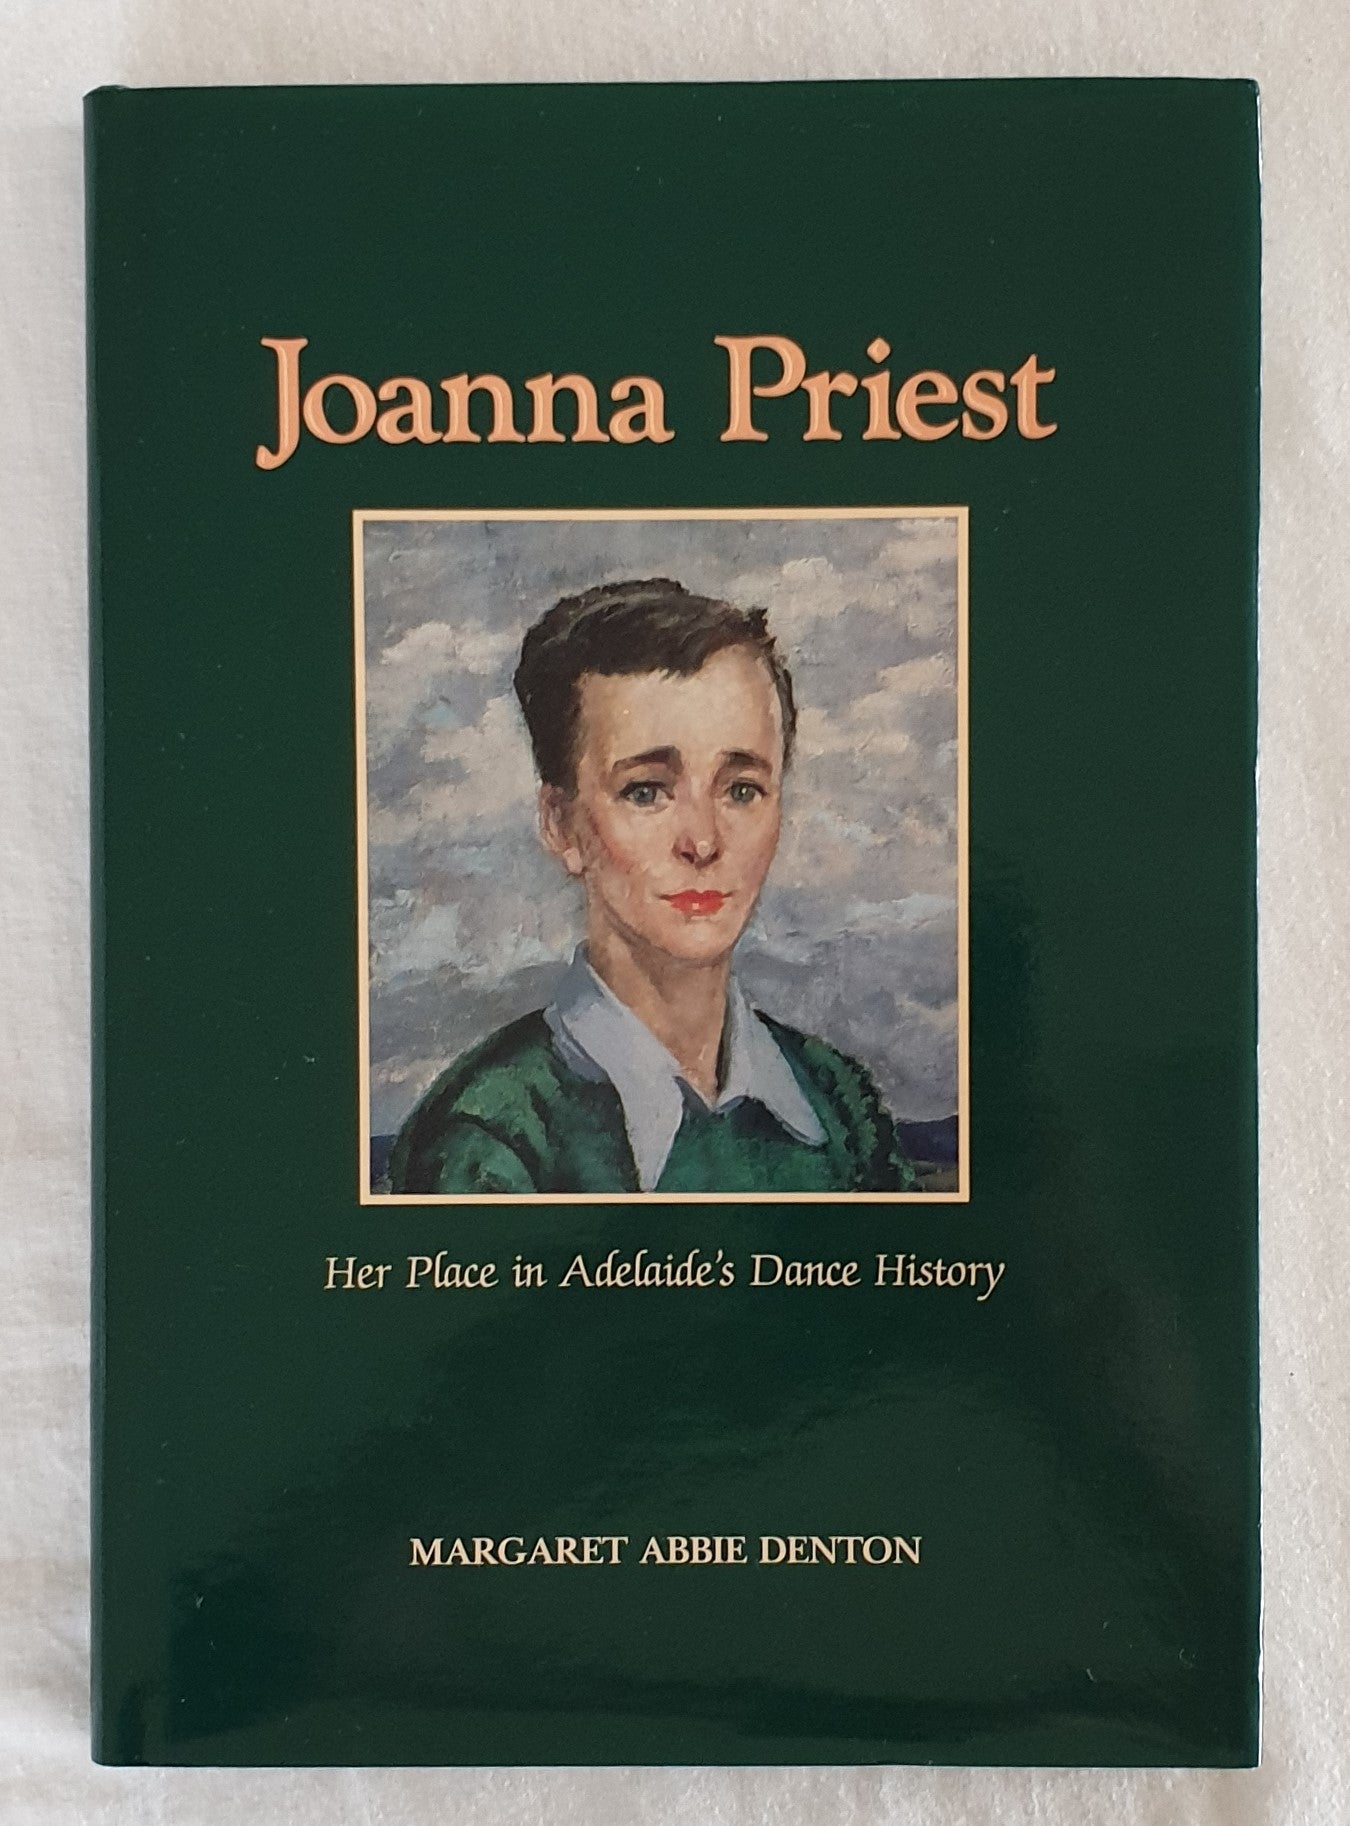 Joanna Priest  Her Place in Adelaide's Dance History  by Margaret Abbie Denton